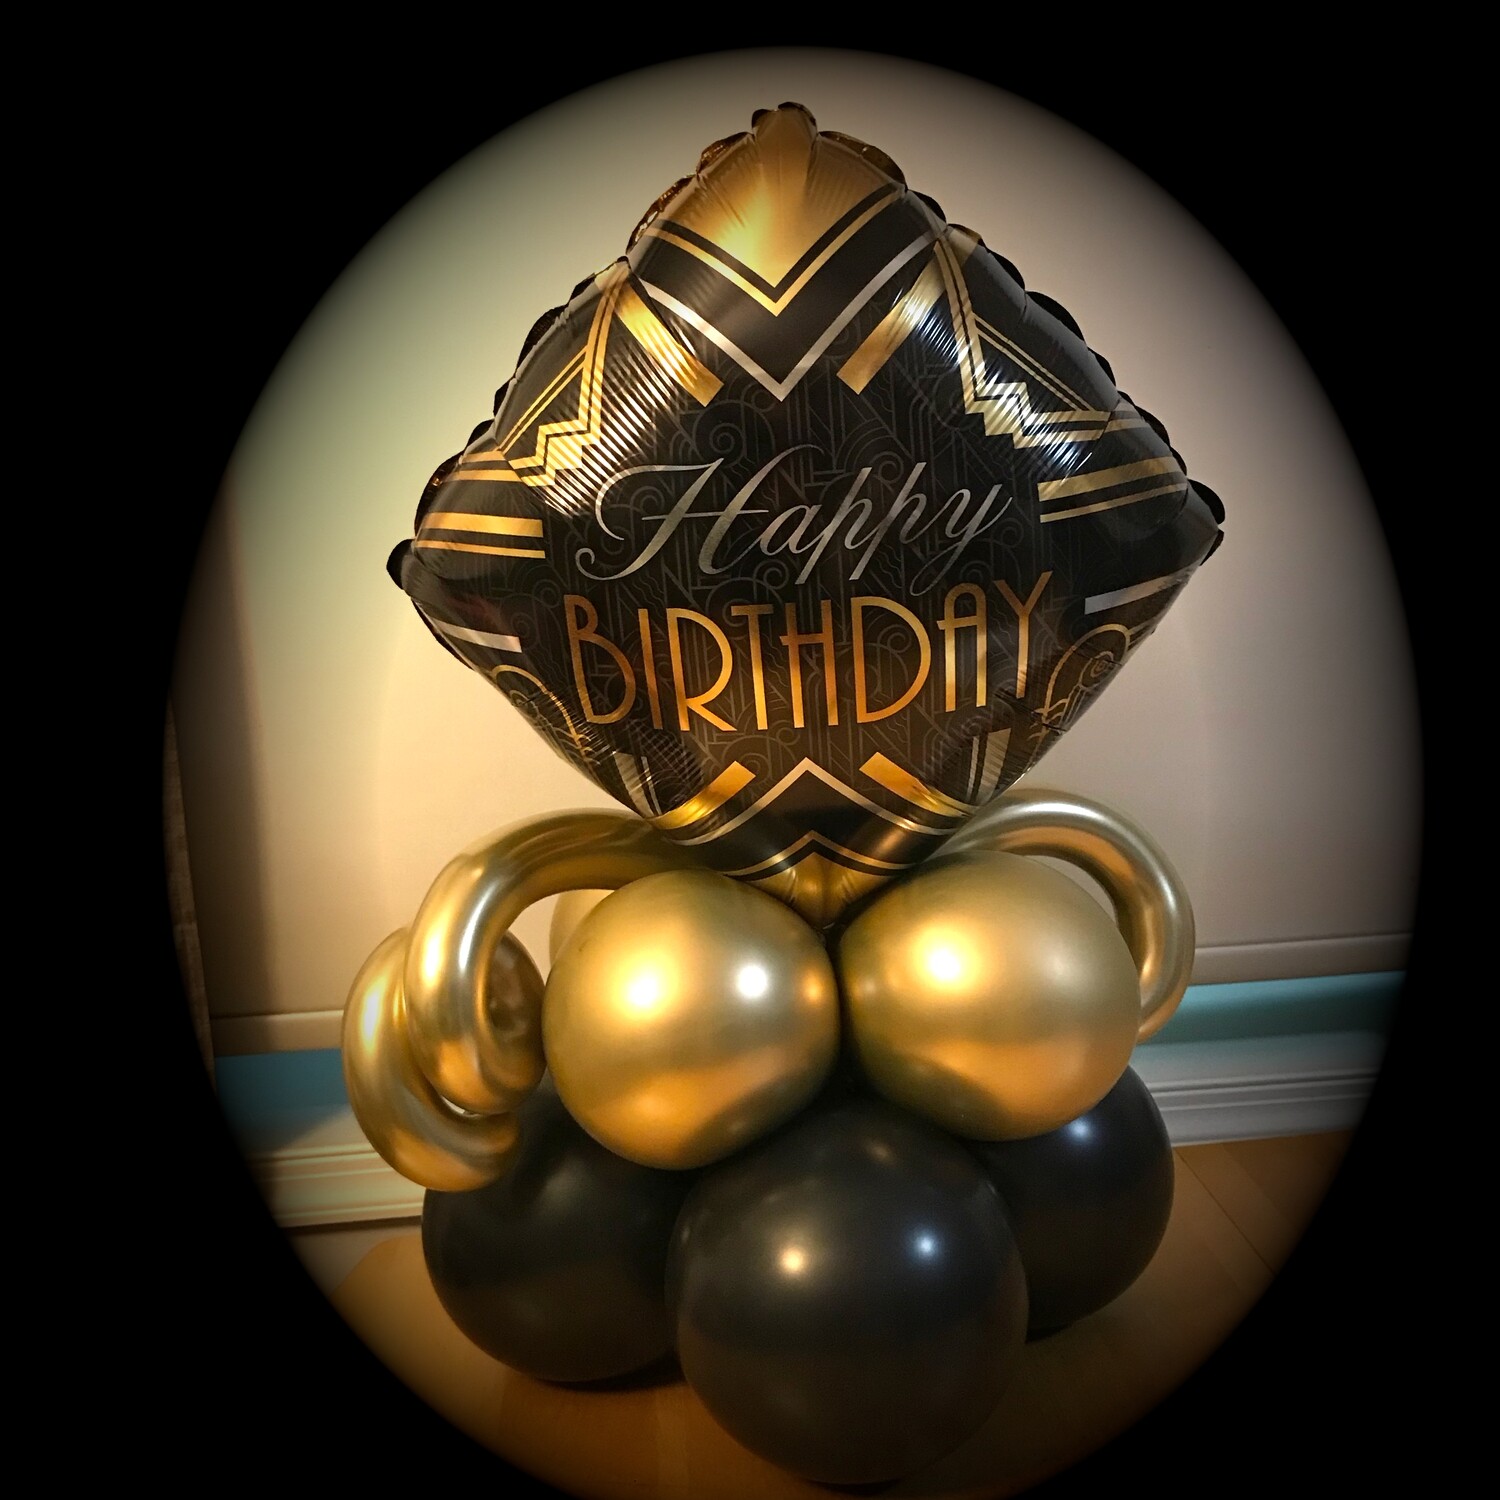 Low bubble birthday balloon gold & black art deco topper (indoors only)